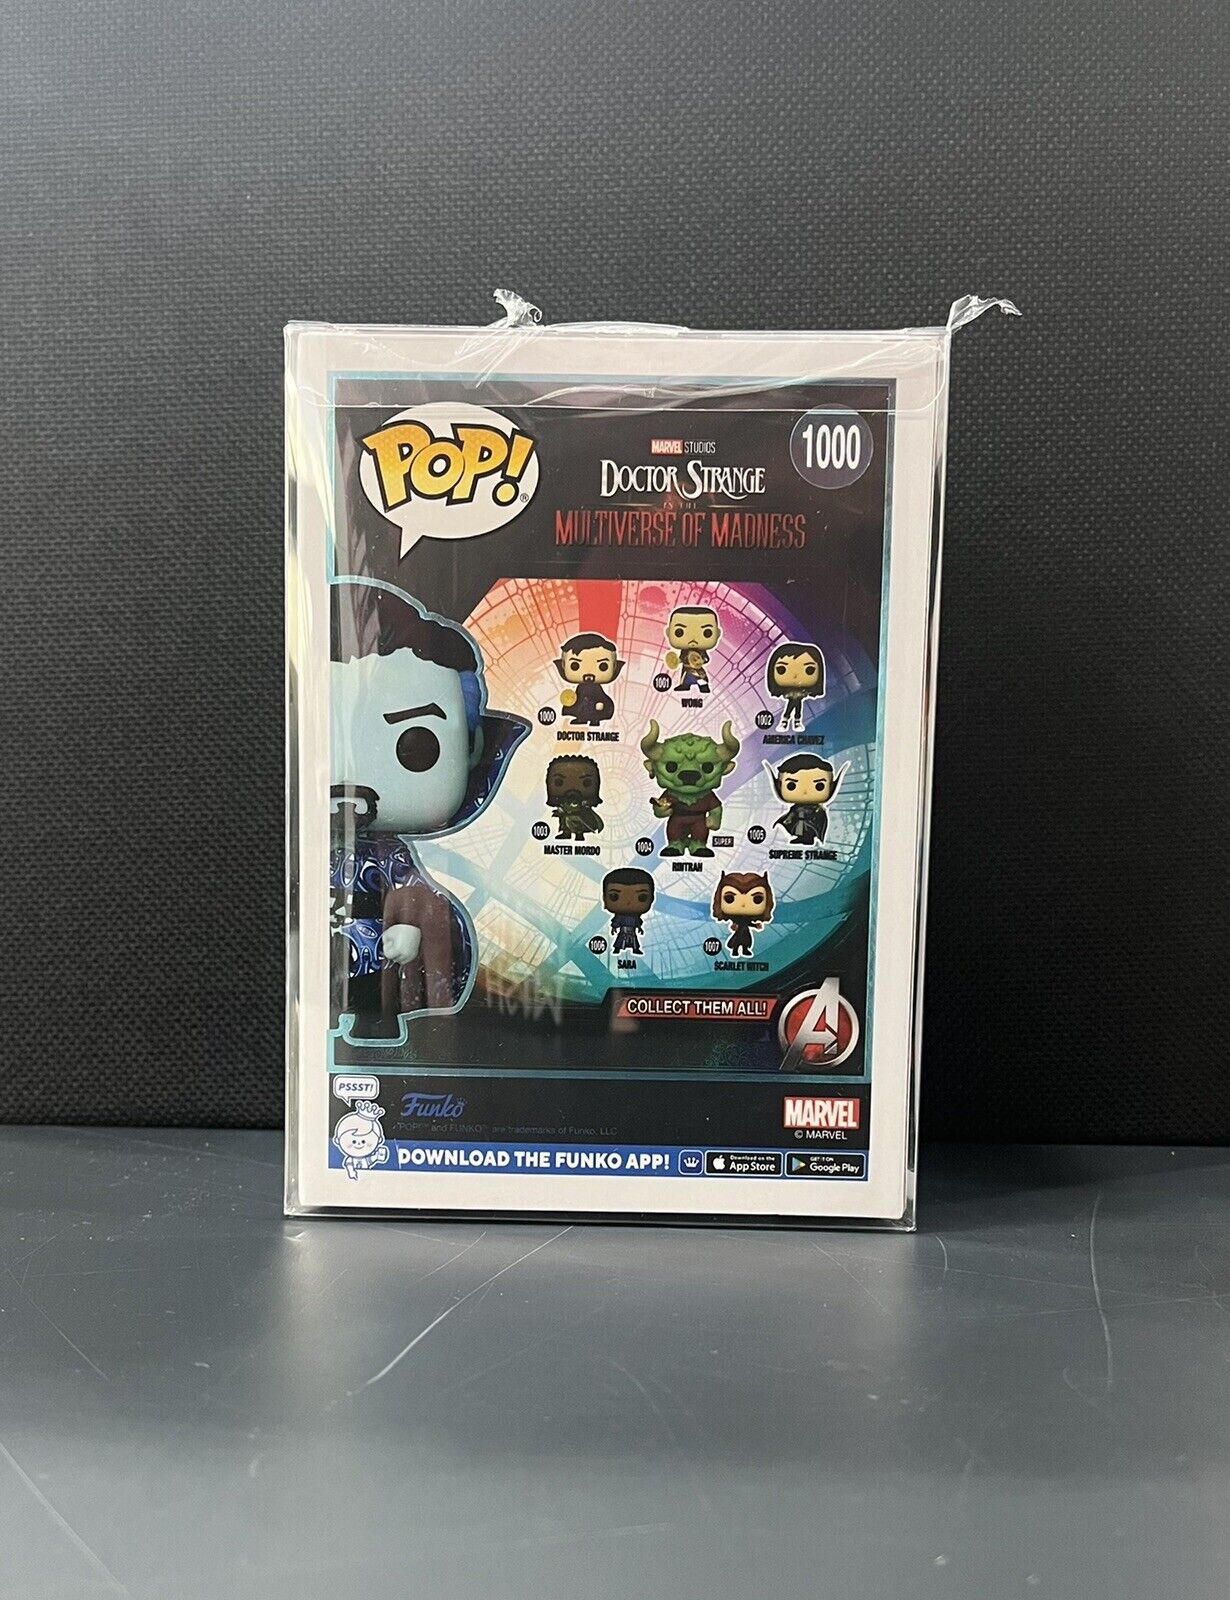 Funko POP Doctory Strange #1000 - Limited Chase Edition